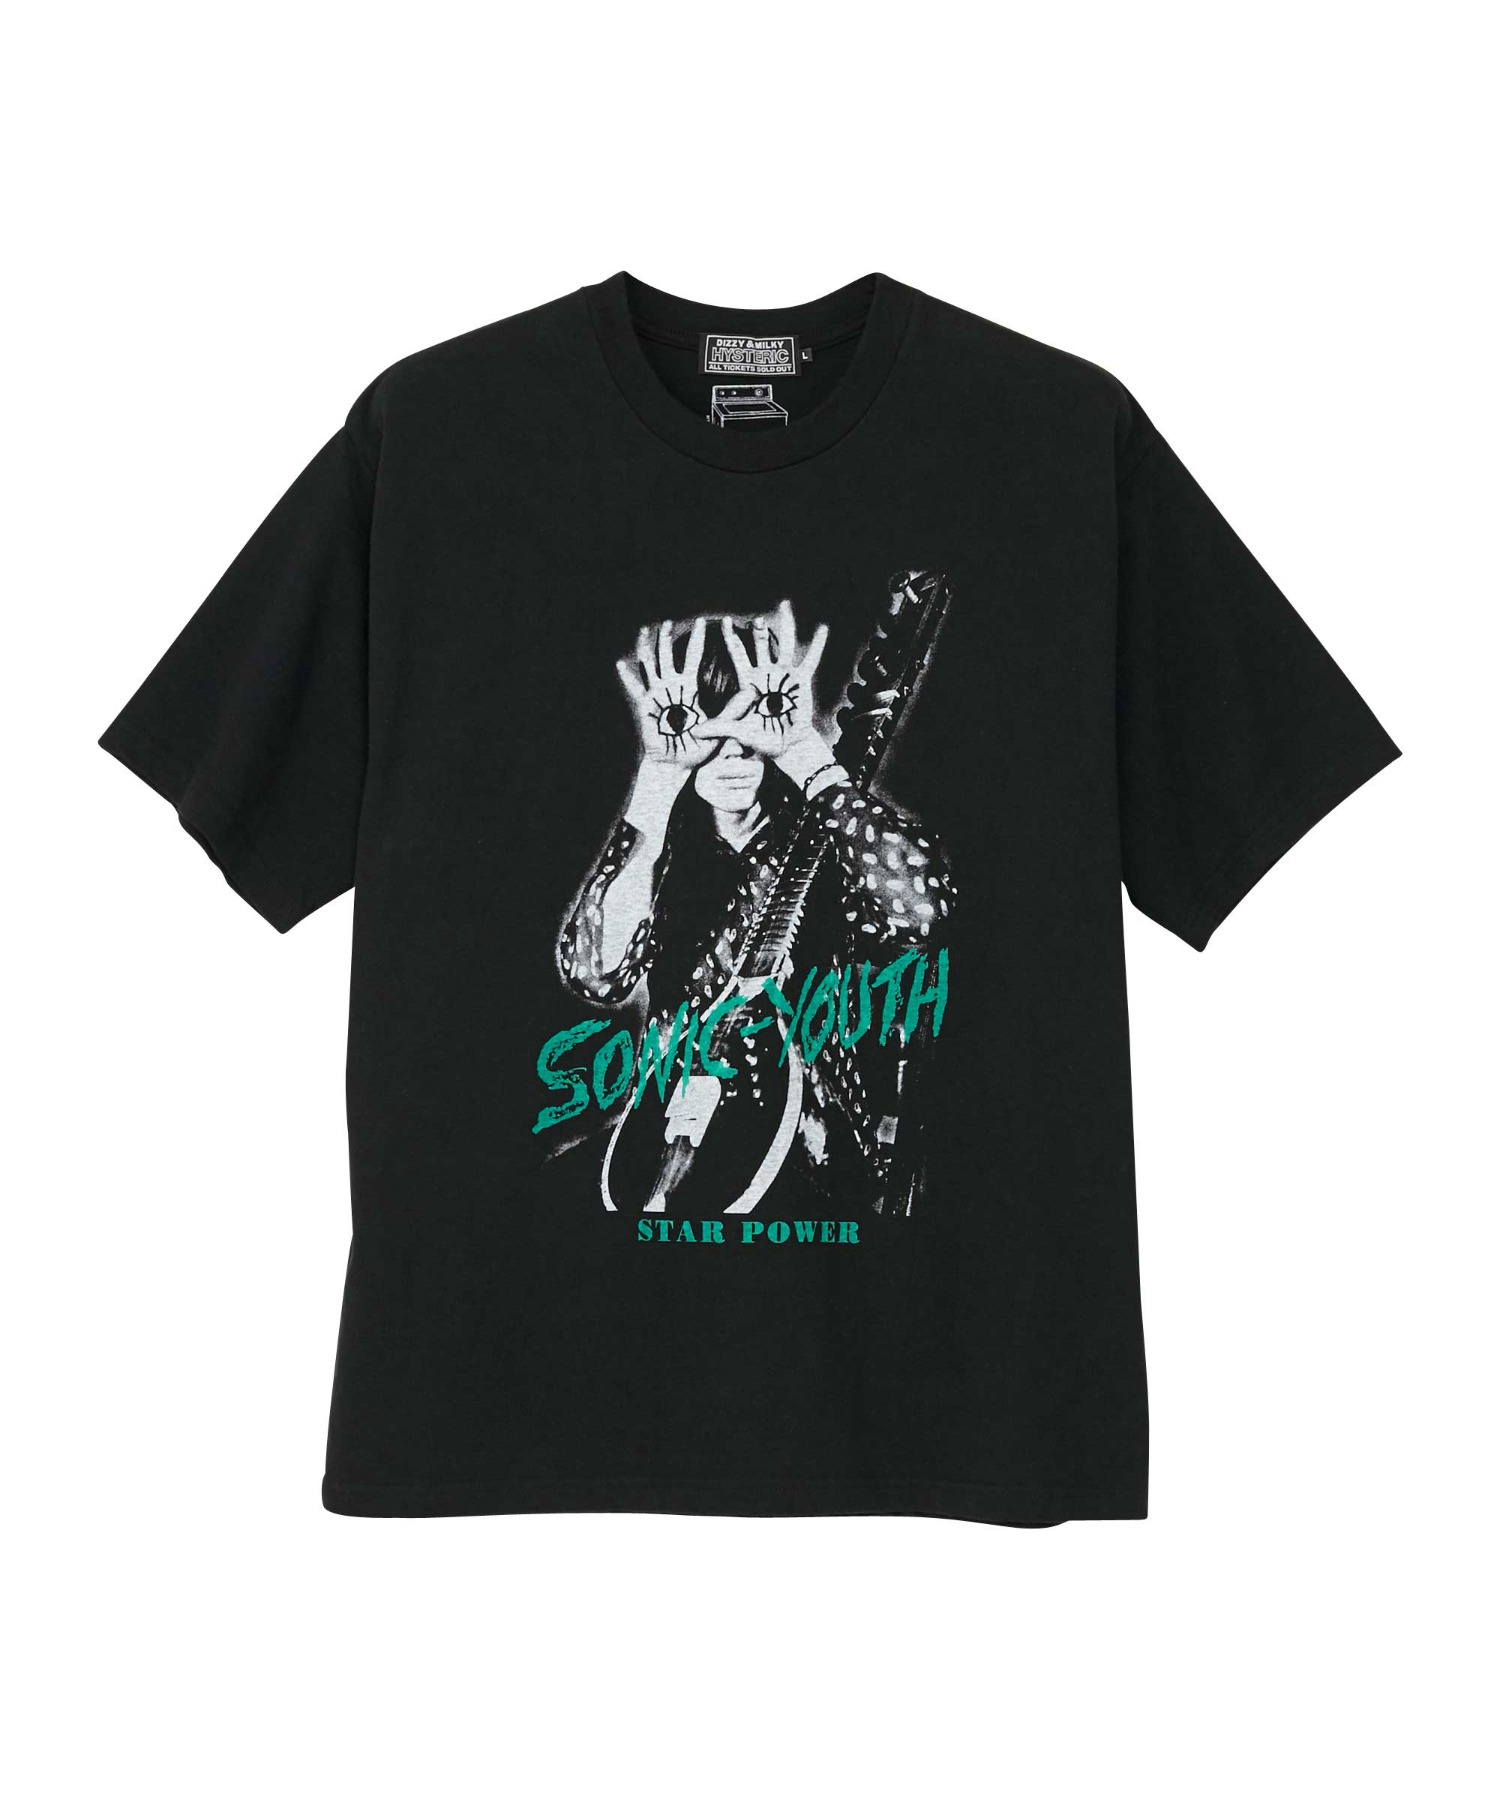 SONIC YOUTH/STAR POWER Tシャツ